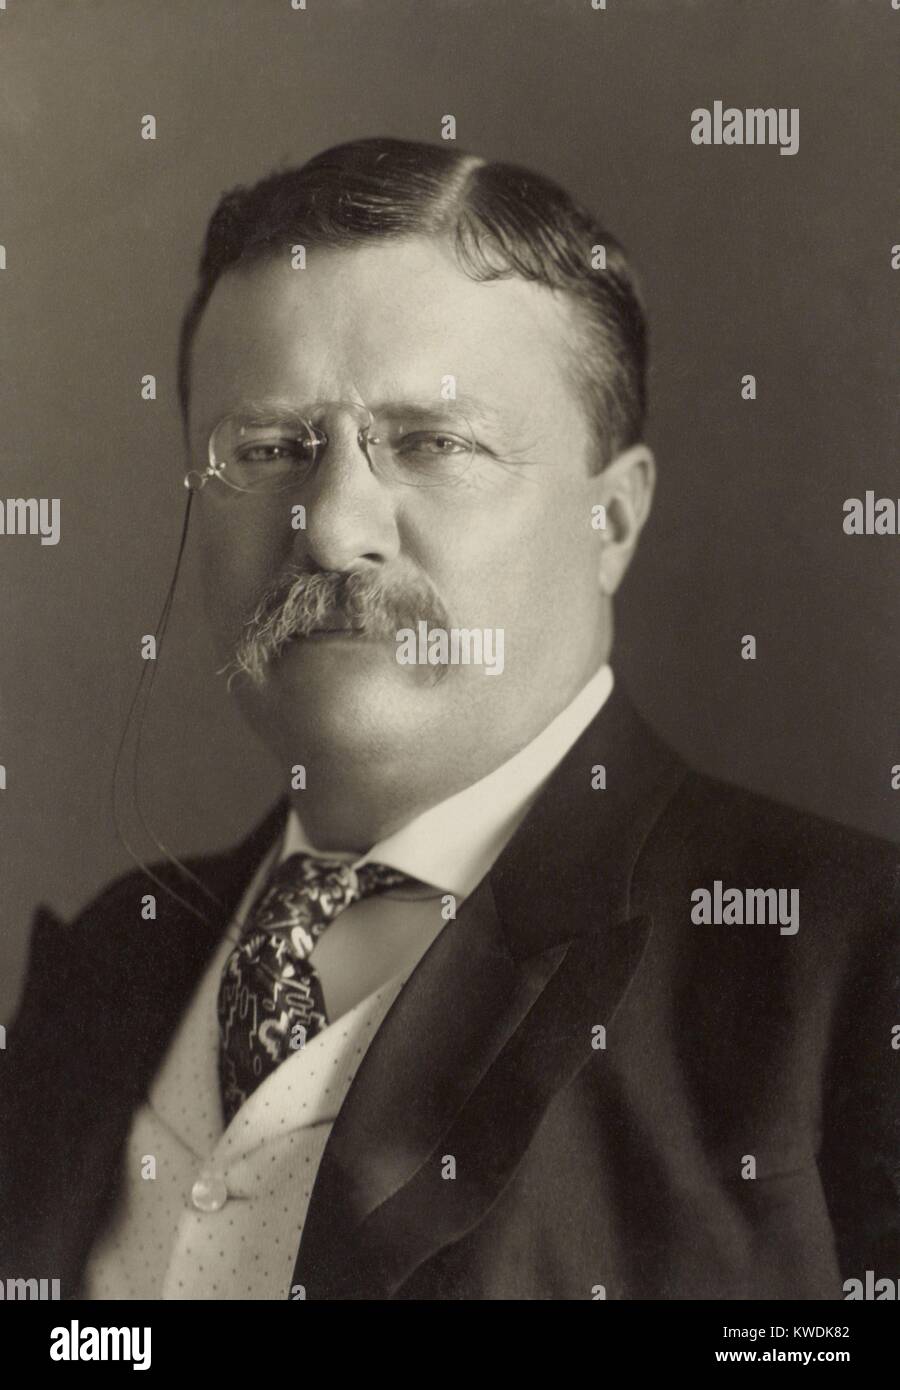 President Theodore Roosevelt, 1904 portrait by Pach Brothers of New York (BSLOC 2017 6 46) Stock Photo